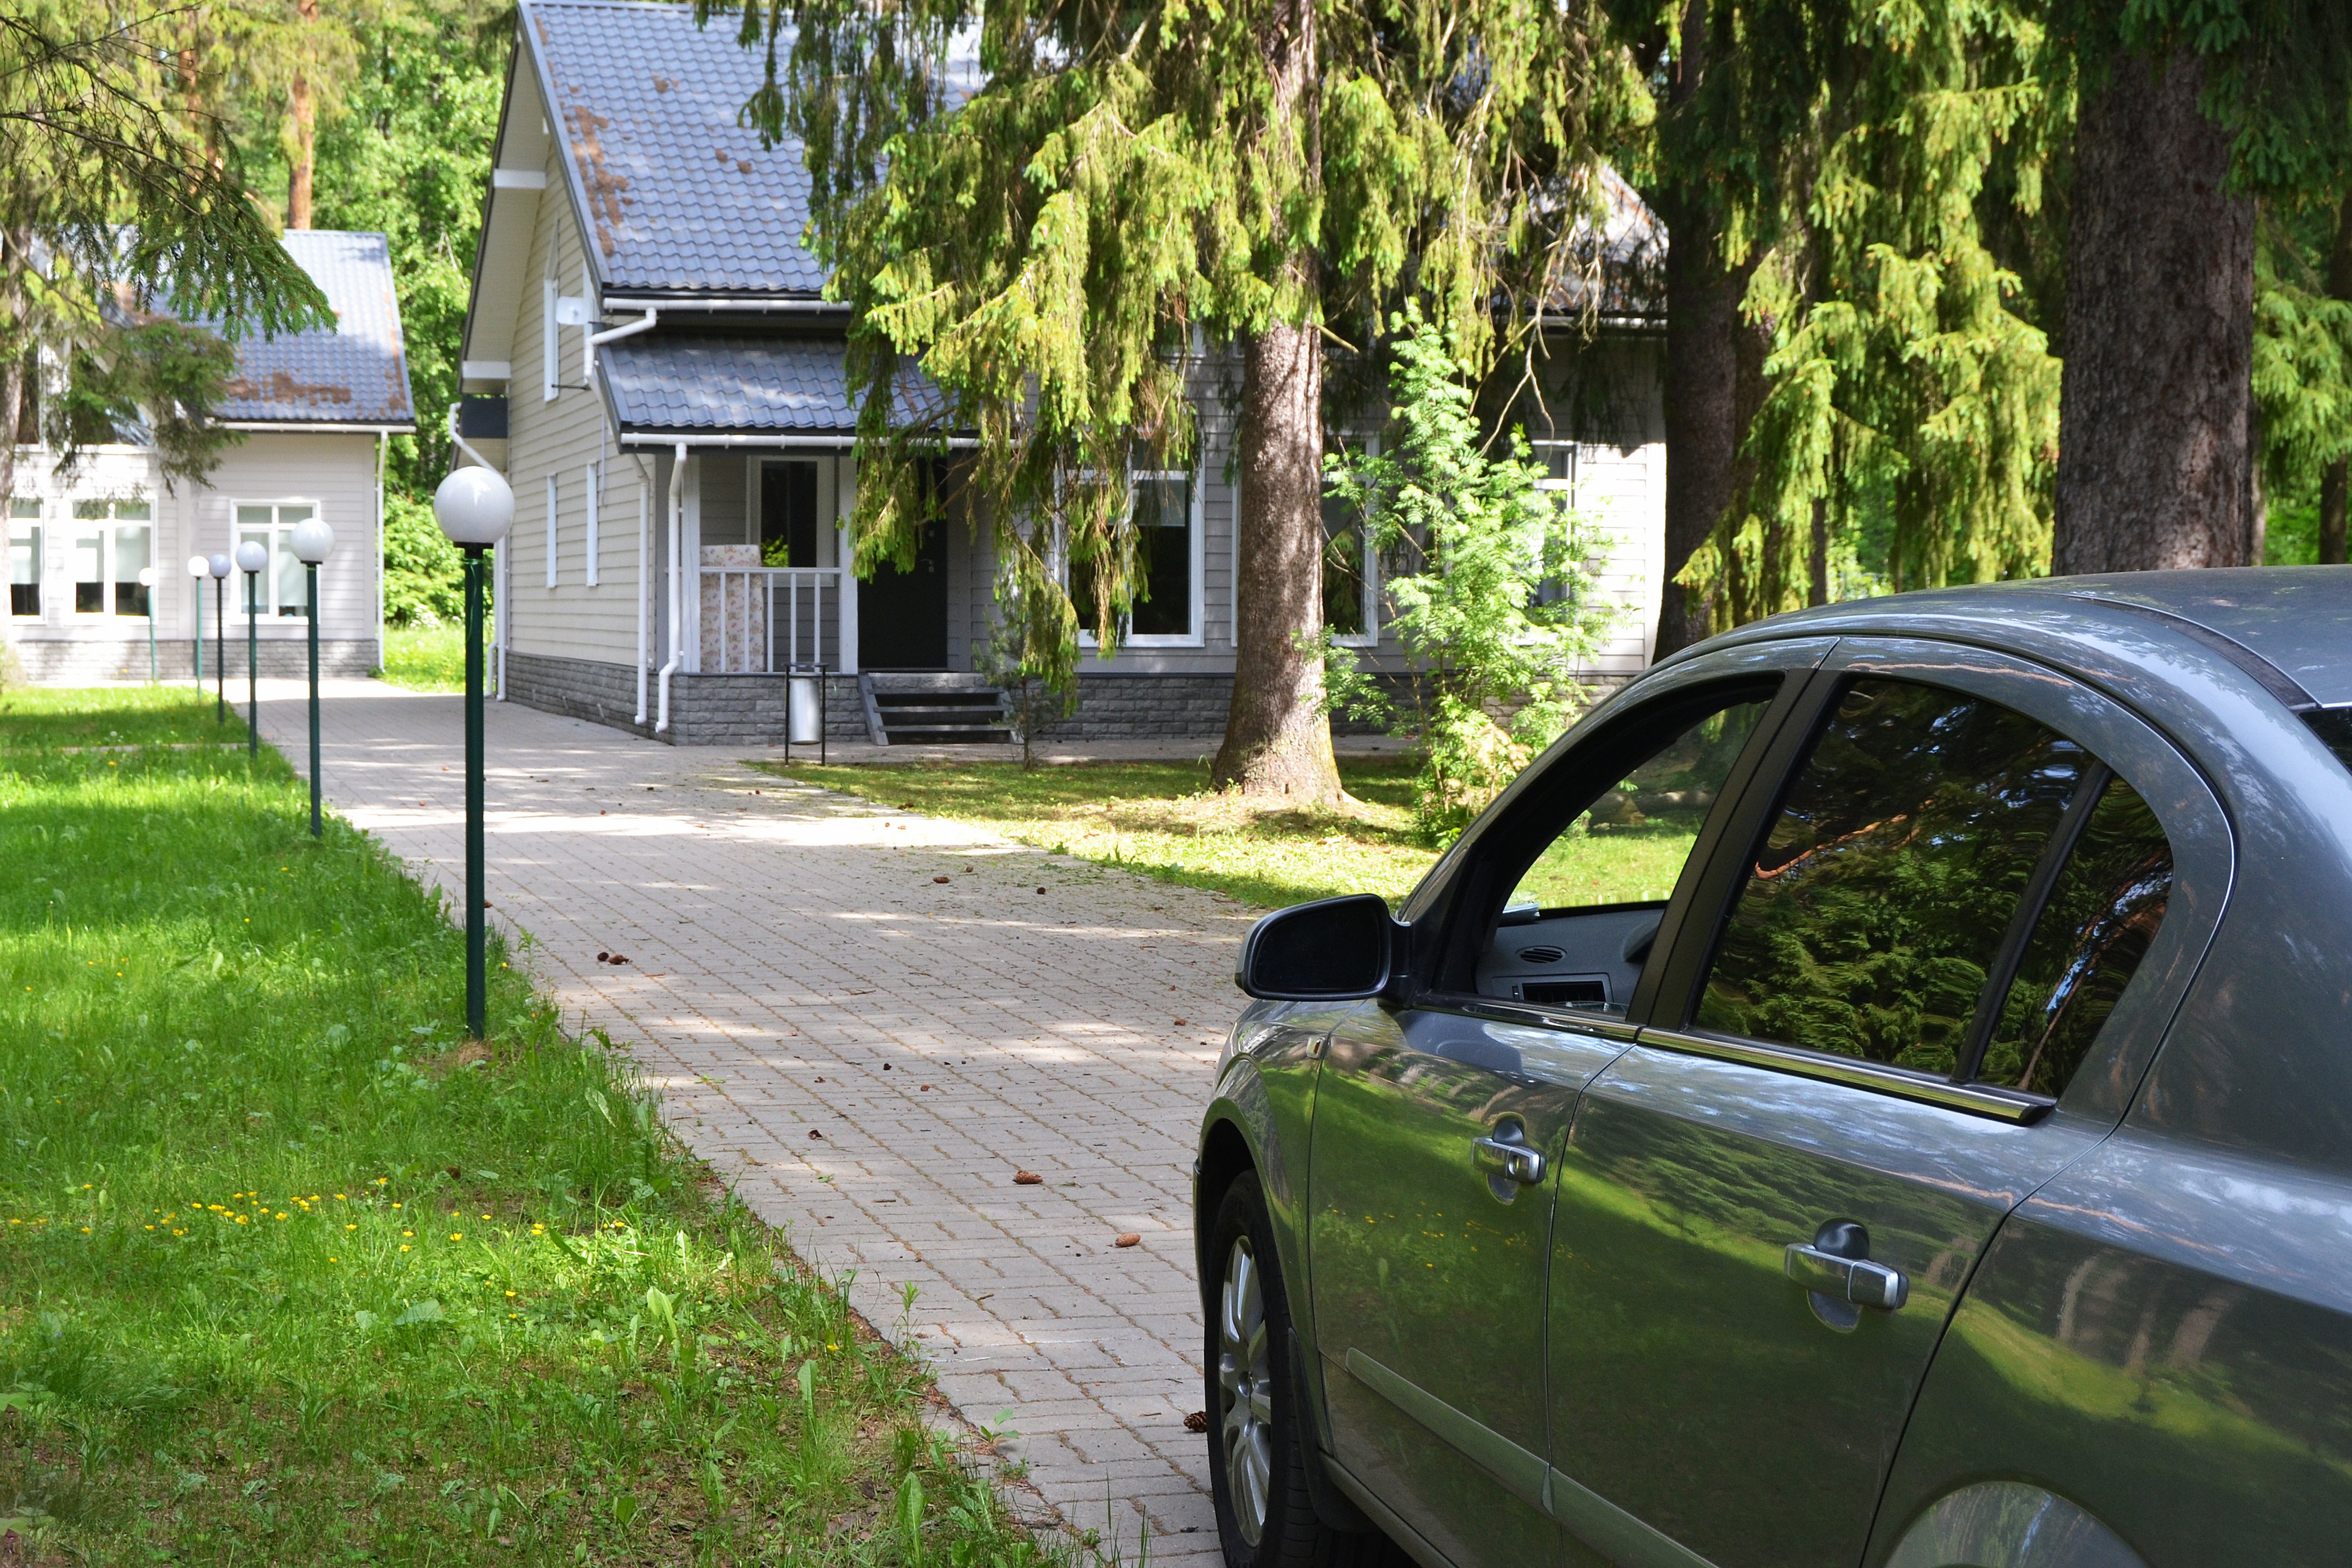 Car parked in the driveway of a suburban house | Photo: Shutterstock